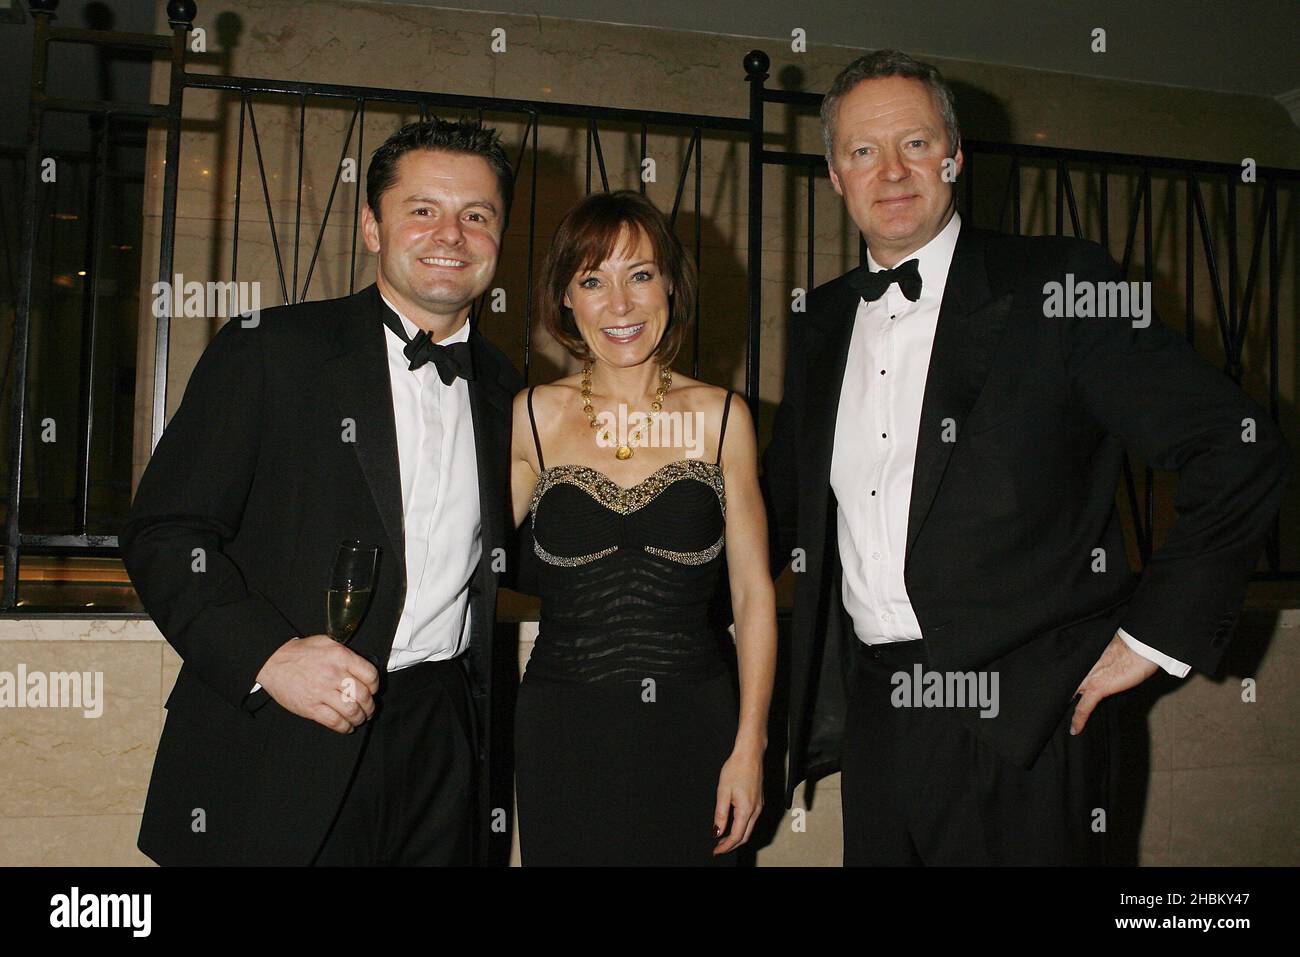 Chris Hollins,Sian Williams, and Rory Bremner at the Sparks Ball, The Hilton, London. Stock Photo